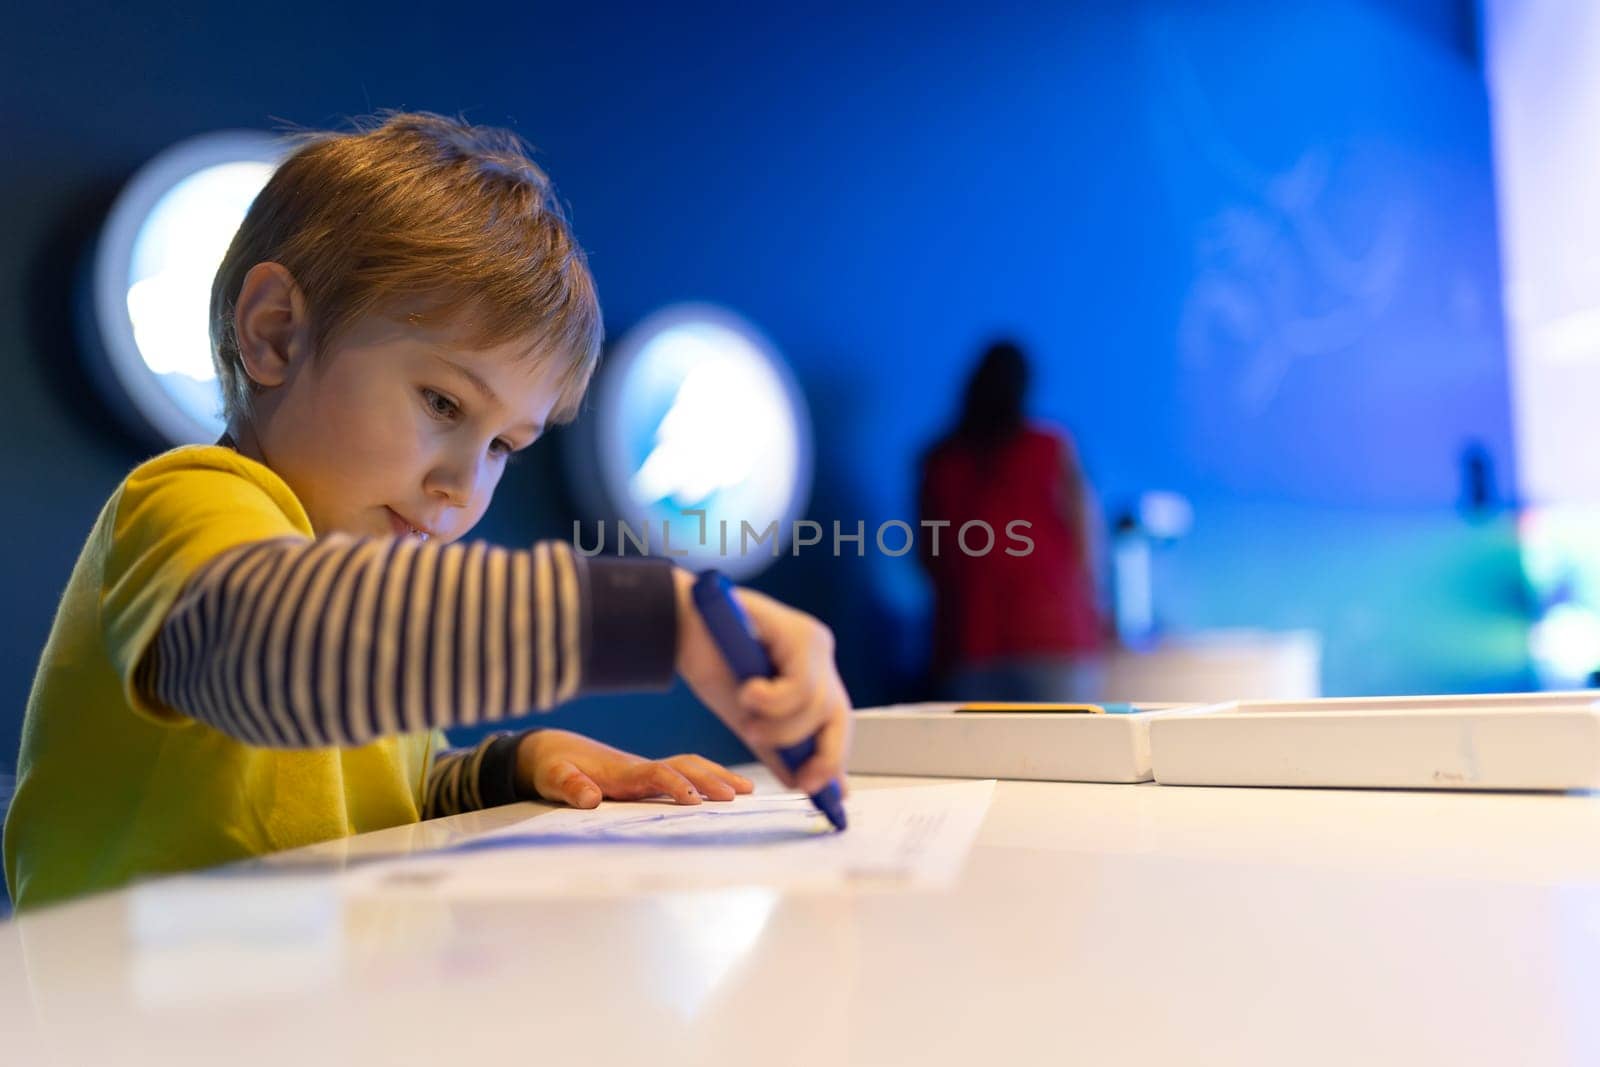 A boy is drawing on a piece of paper with a blue marker. He is wearing a yellow shirt